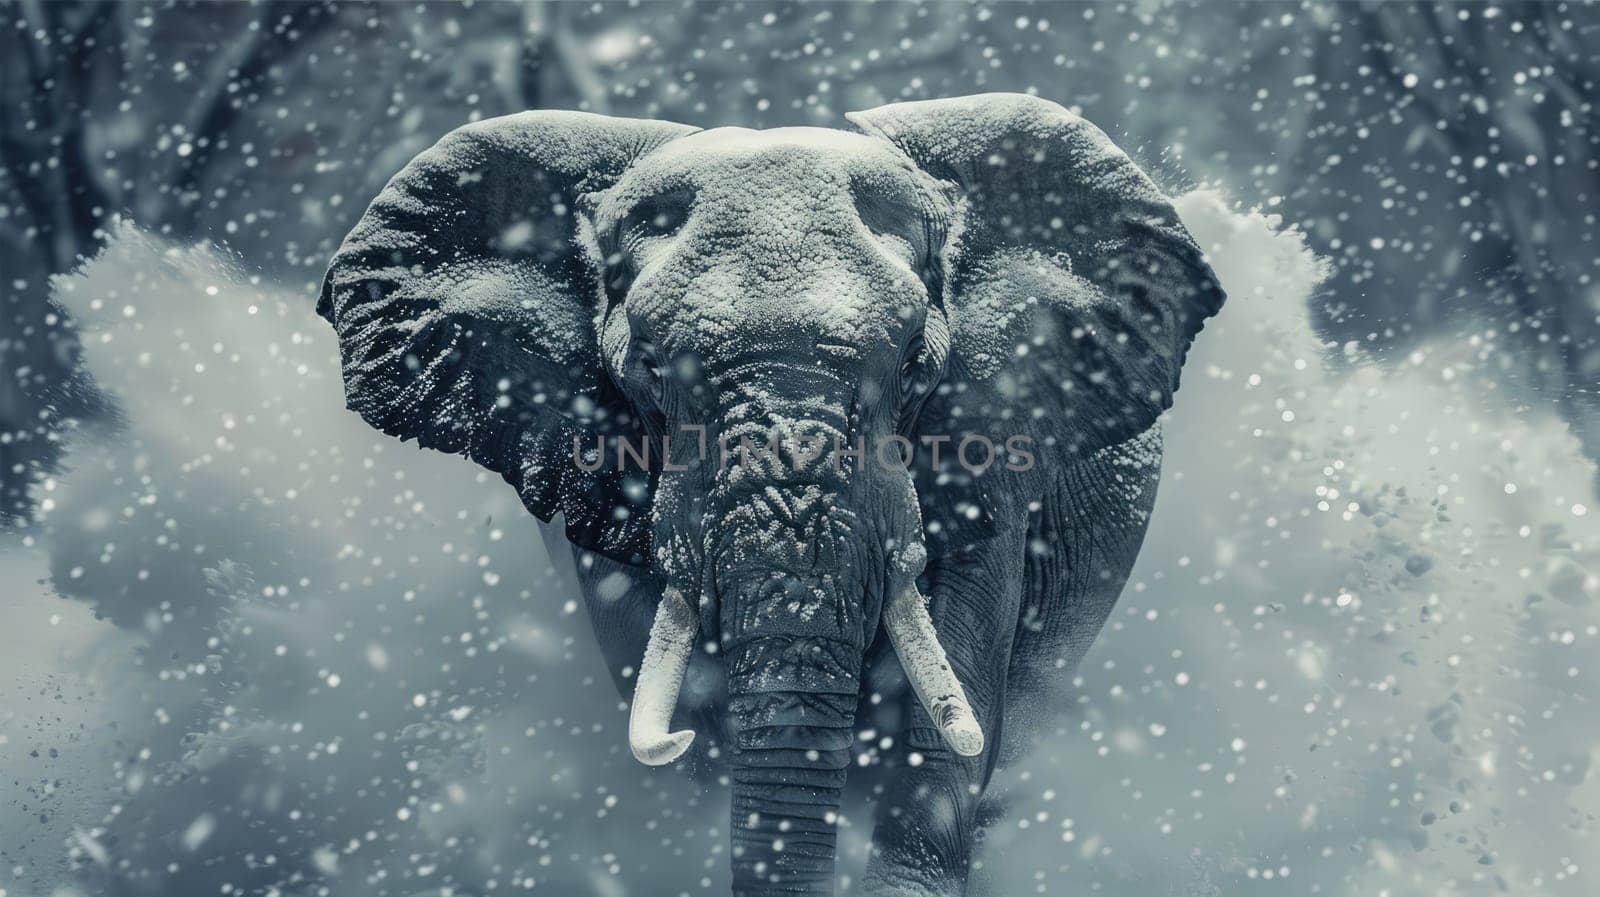 An elephant lost in a snowstorm. An unusual environment for an elephant. by natali_brill